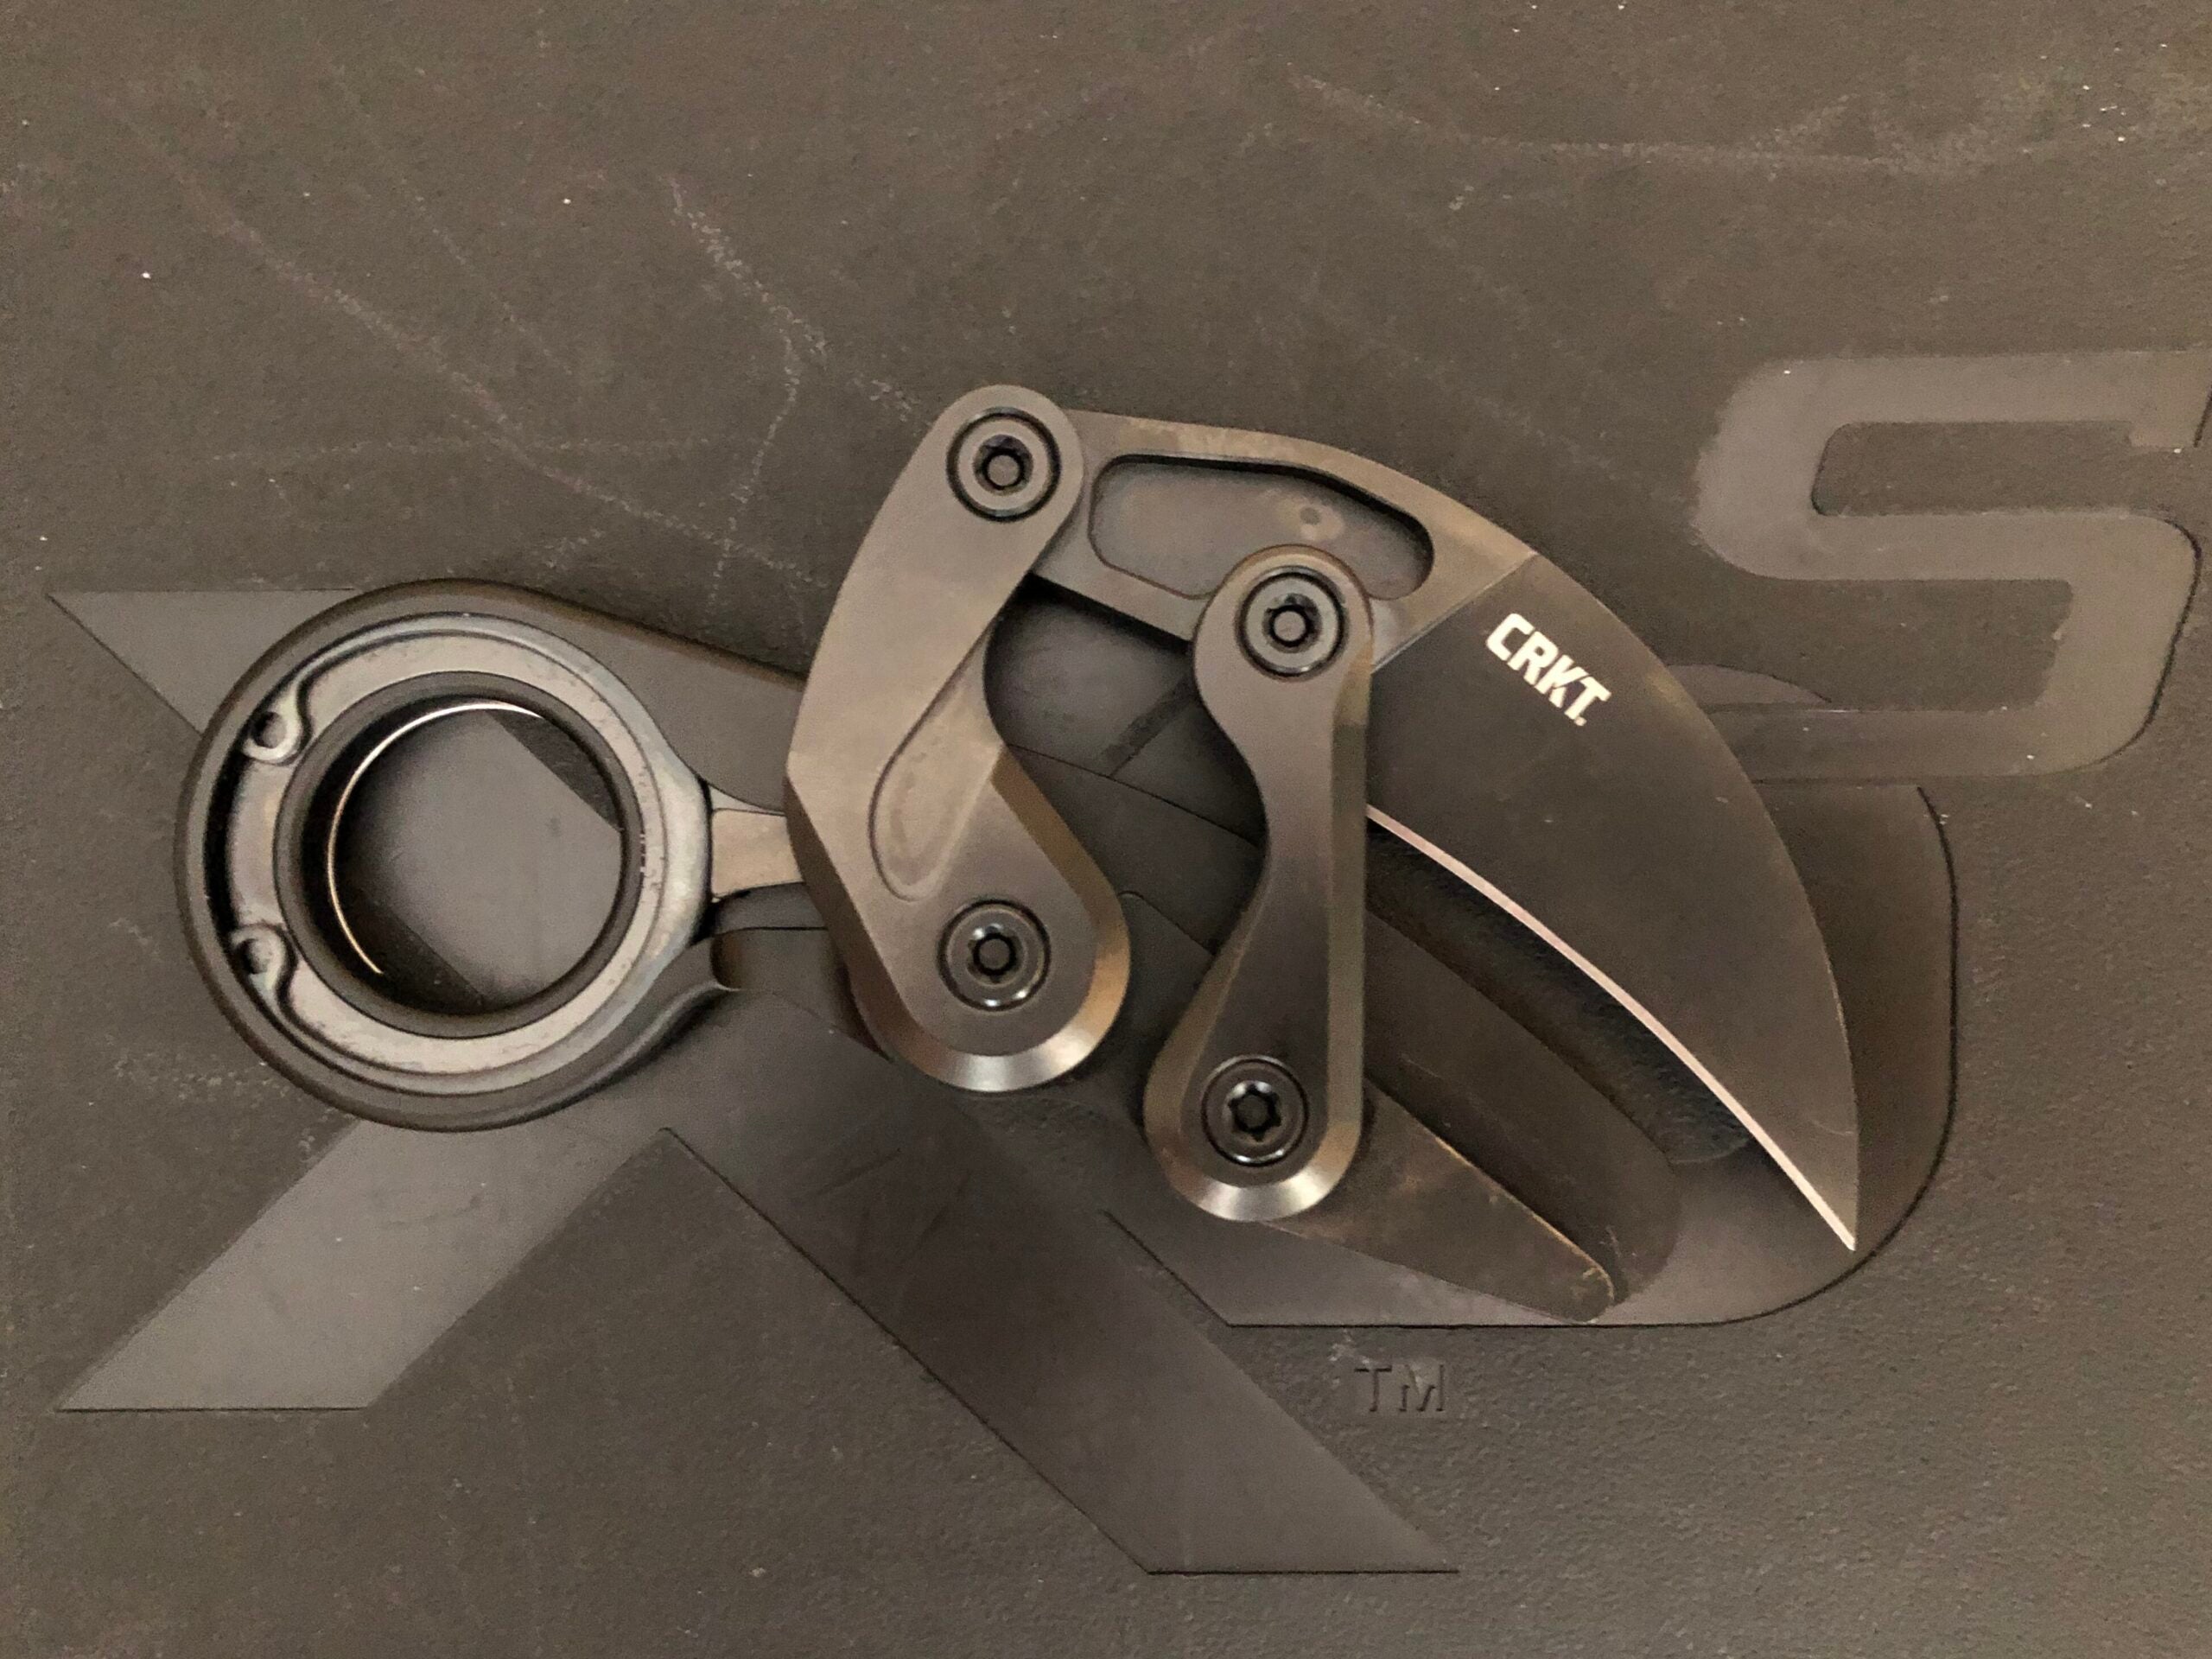 Review: Is the CRKT Provoke a boon or a bust?